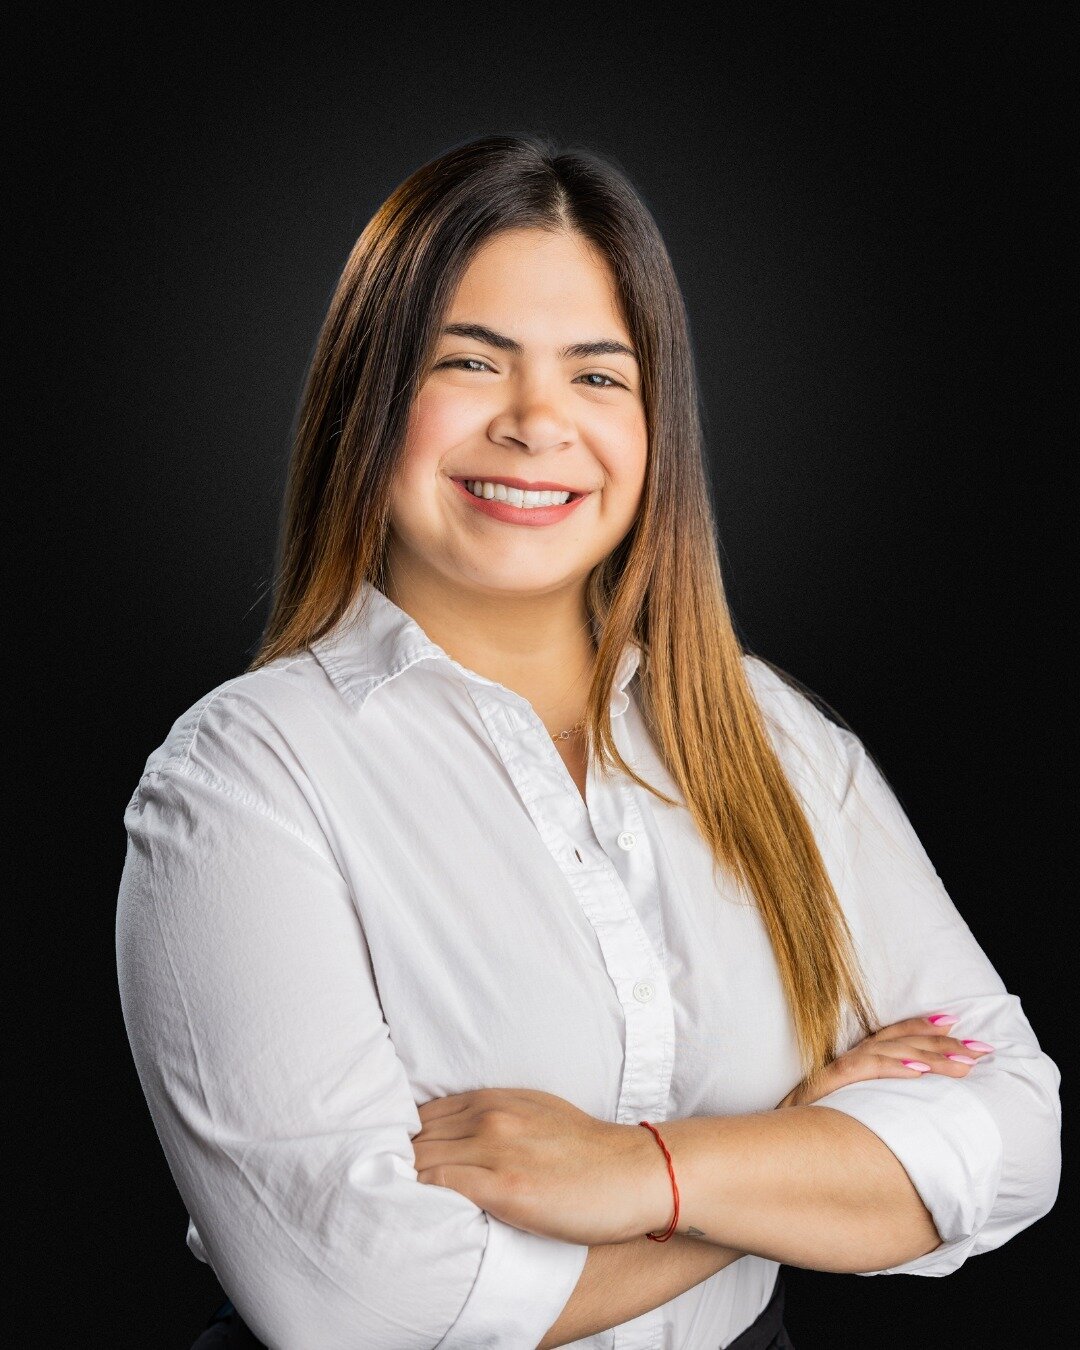 Wishing our HLR client, Mariana (@marianacperez), an incredible birthday. Thank you for everything you do. Keep an eye out for a special delivery today. Happy birthday!⁠
.⁠
.⁠
.⁠
.⁠
.⁠
.⁠
.⁠
.⁠
#happybirthday #client #clientlove #dallas #dallasarchit